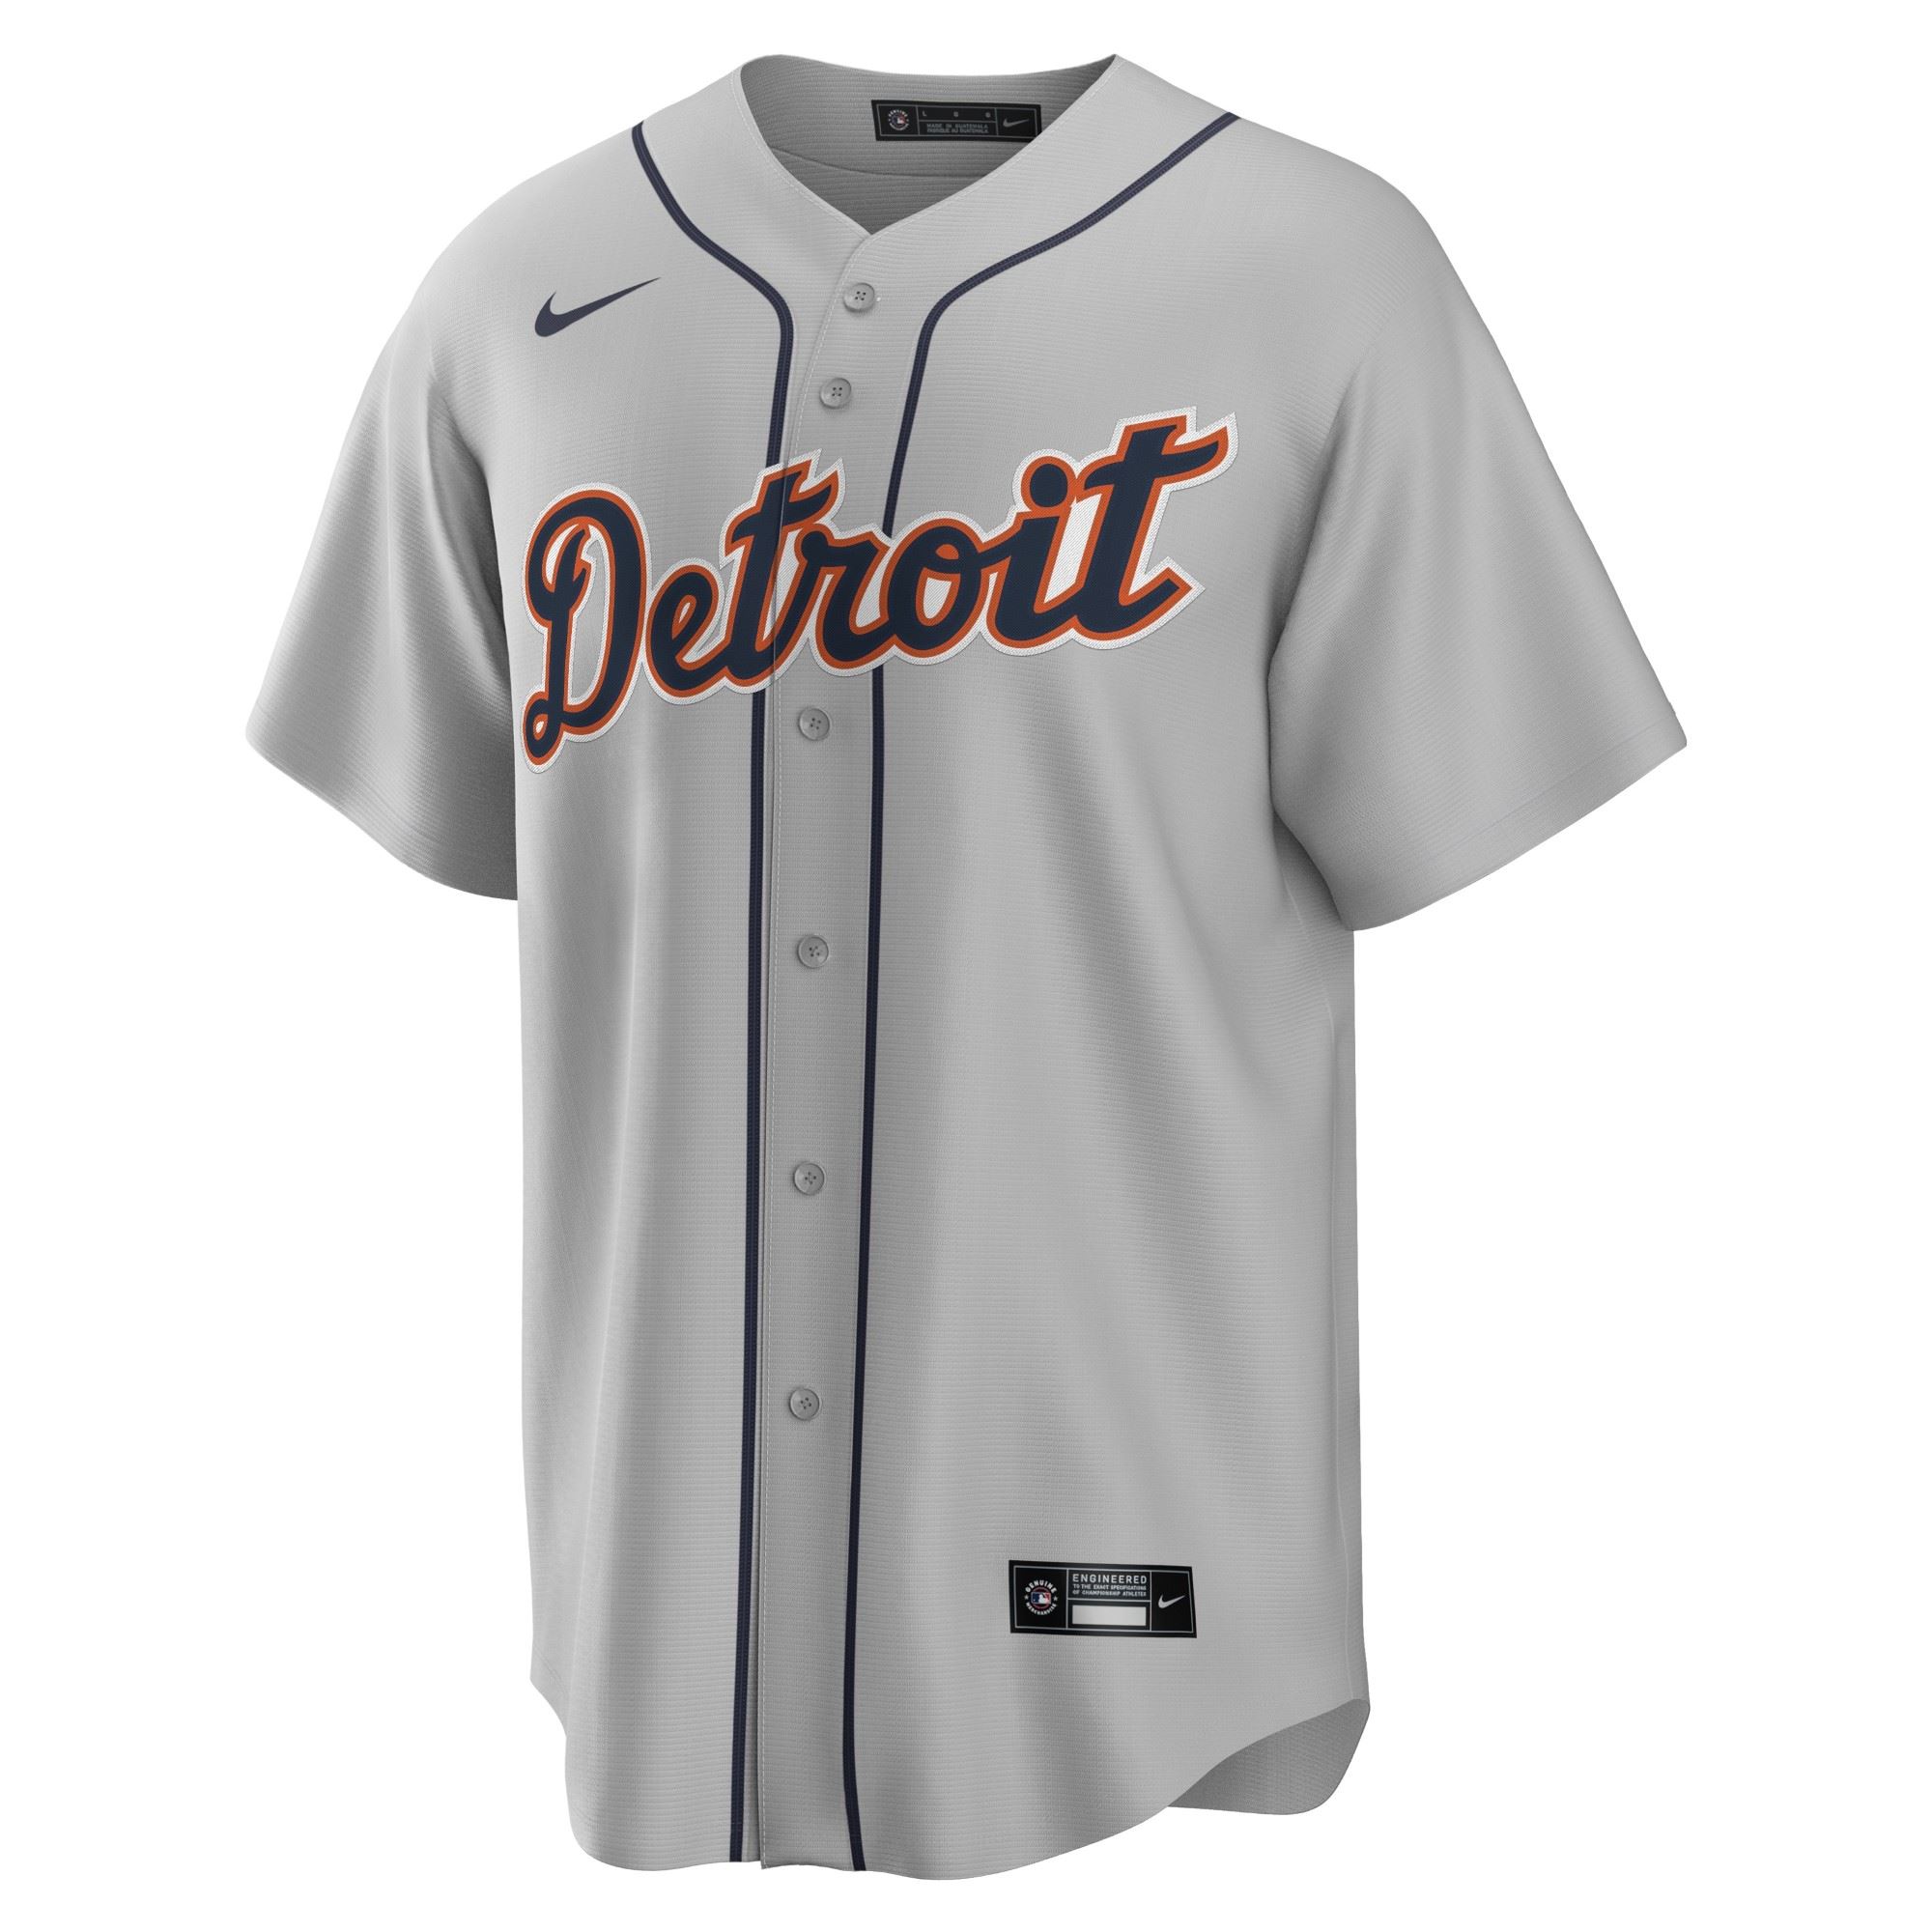 Detroit Tigers Gray Official MLB Replica Road Jersey Nike